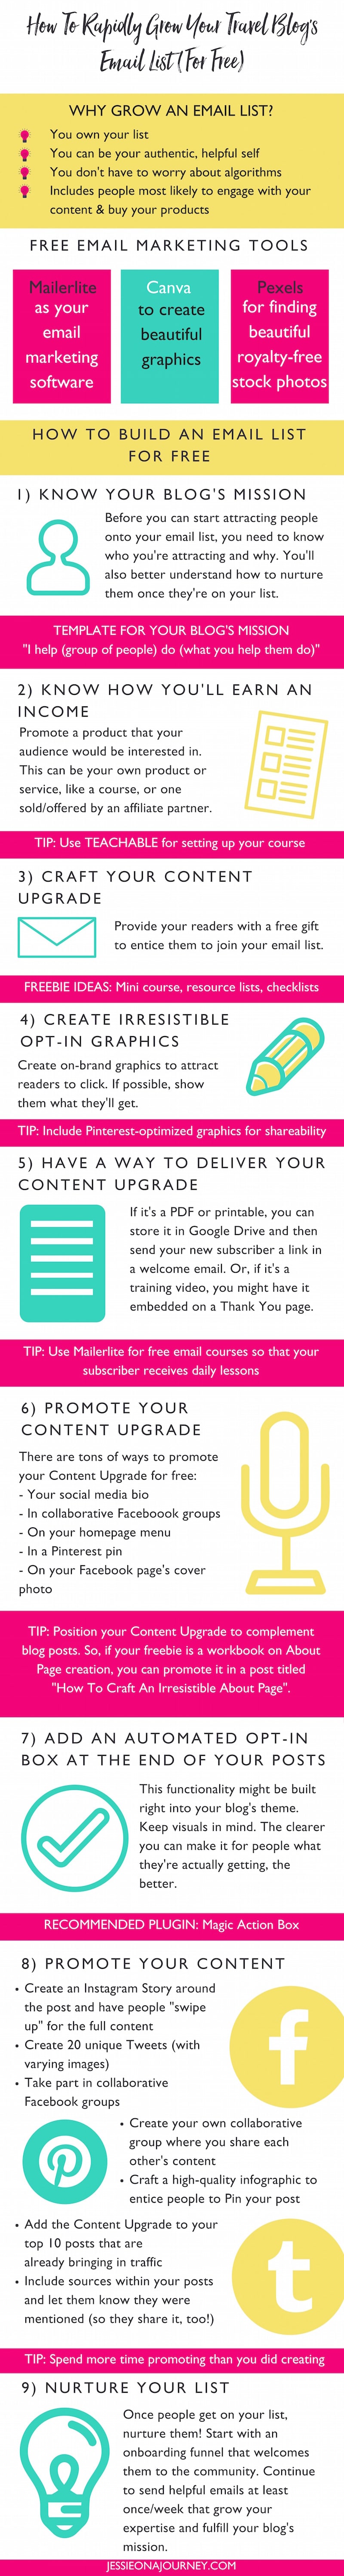 Email Marketing For Bloggers: How To Rapidly Grow Your Email List